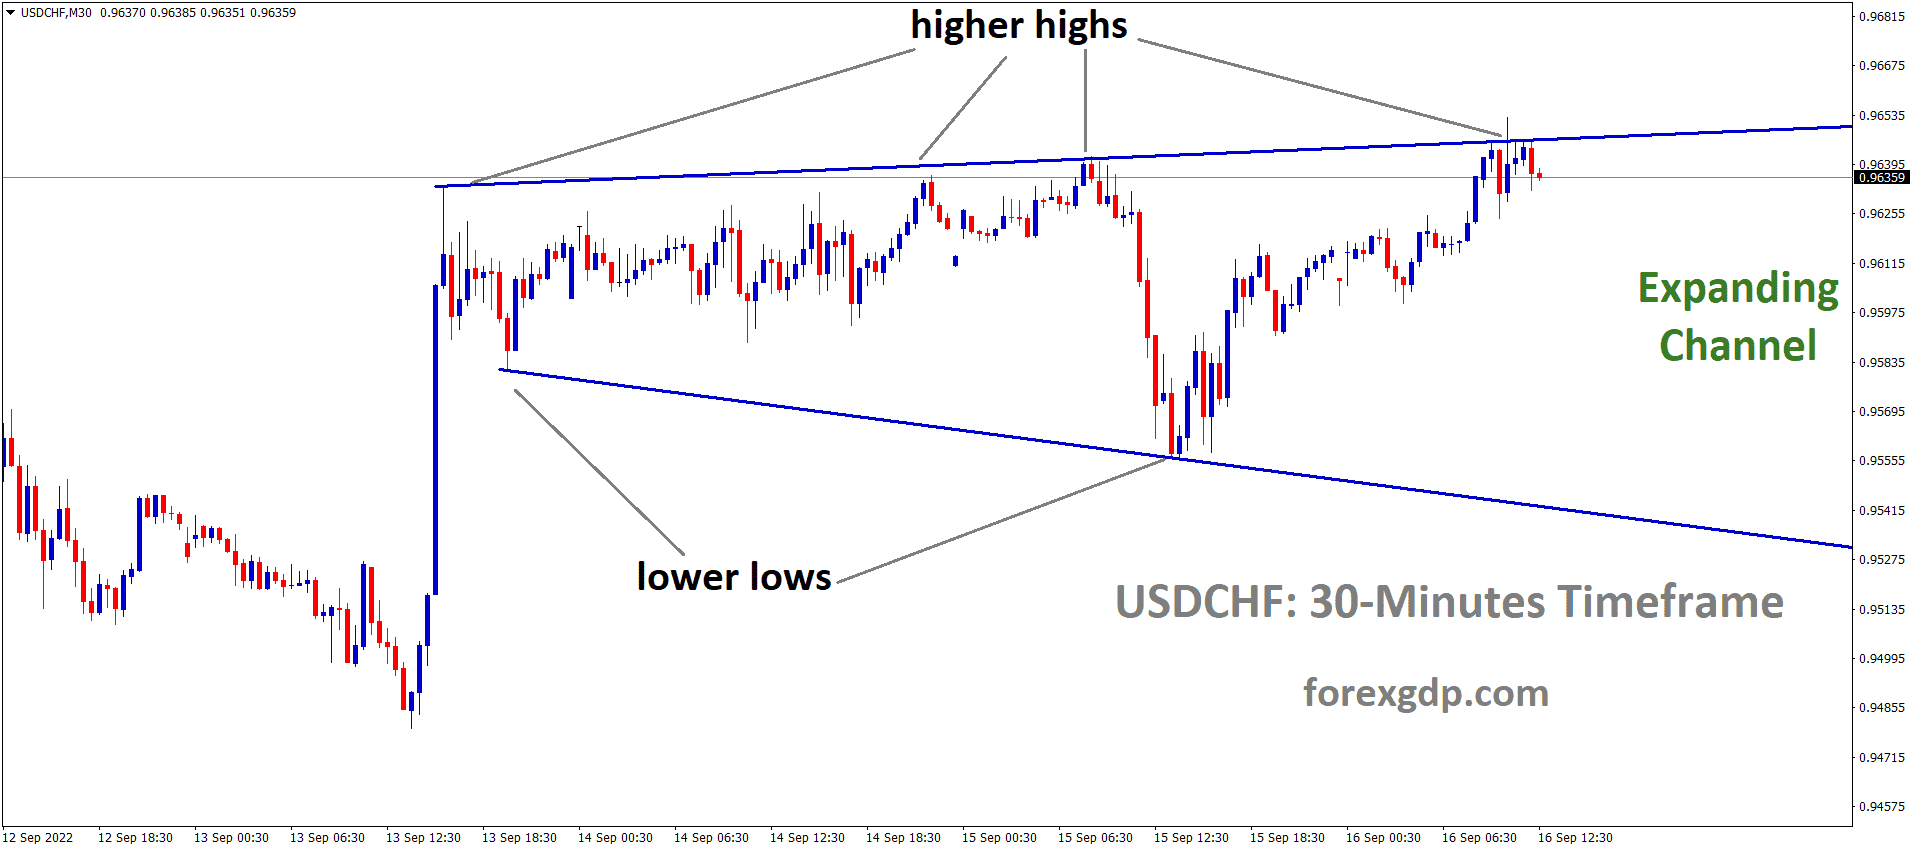 USDCHF is moving in an Expanding channel and the market has reached the higher high area of the channel